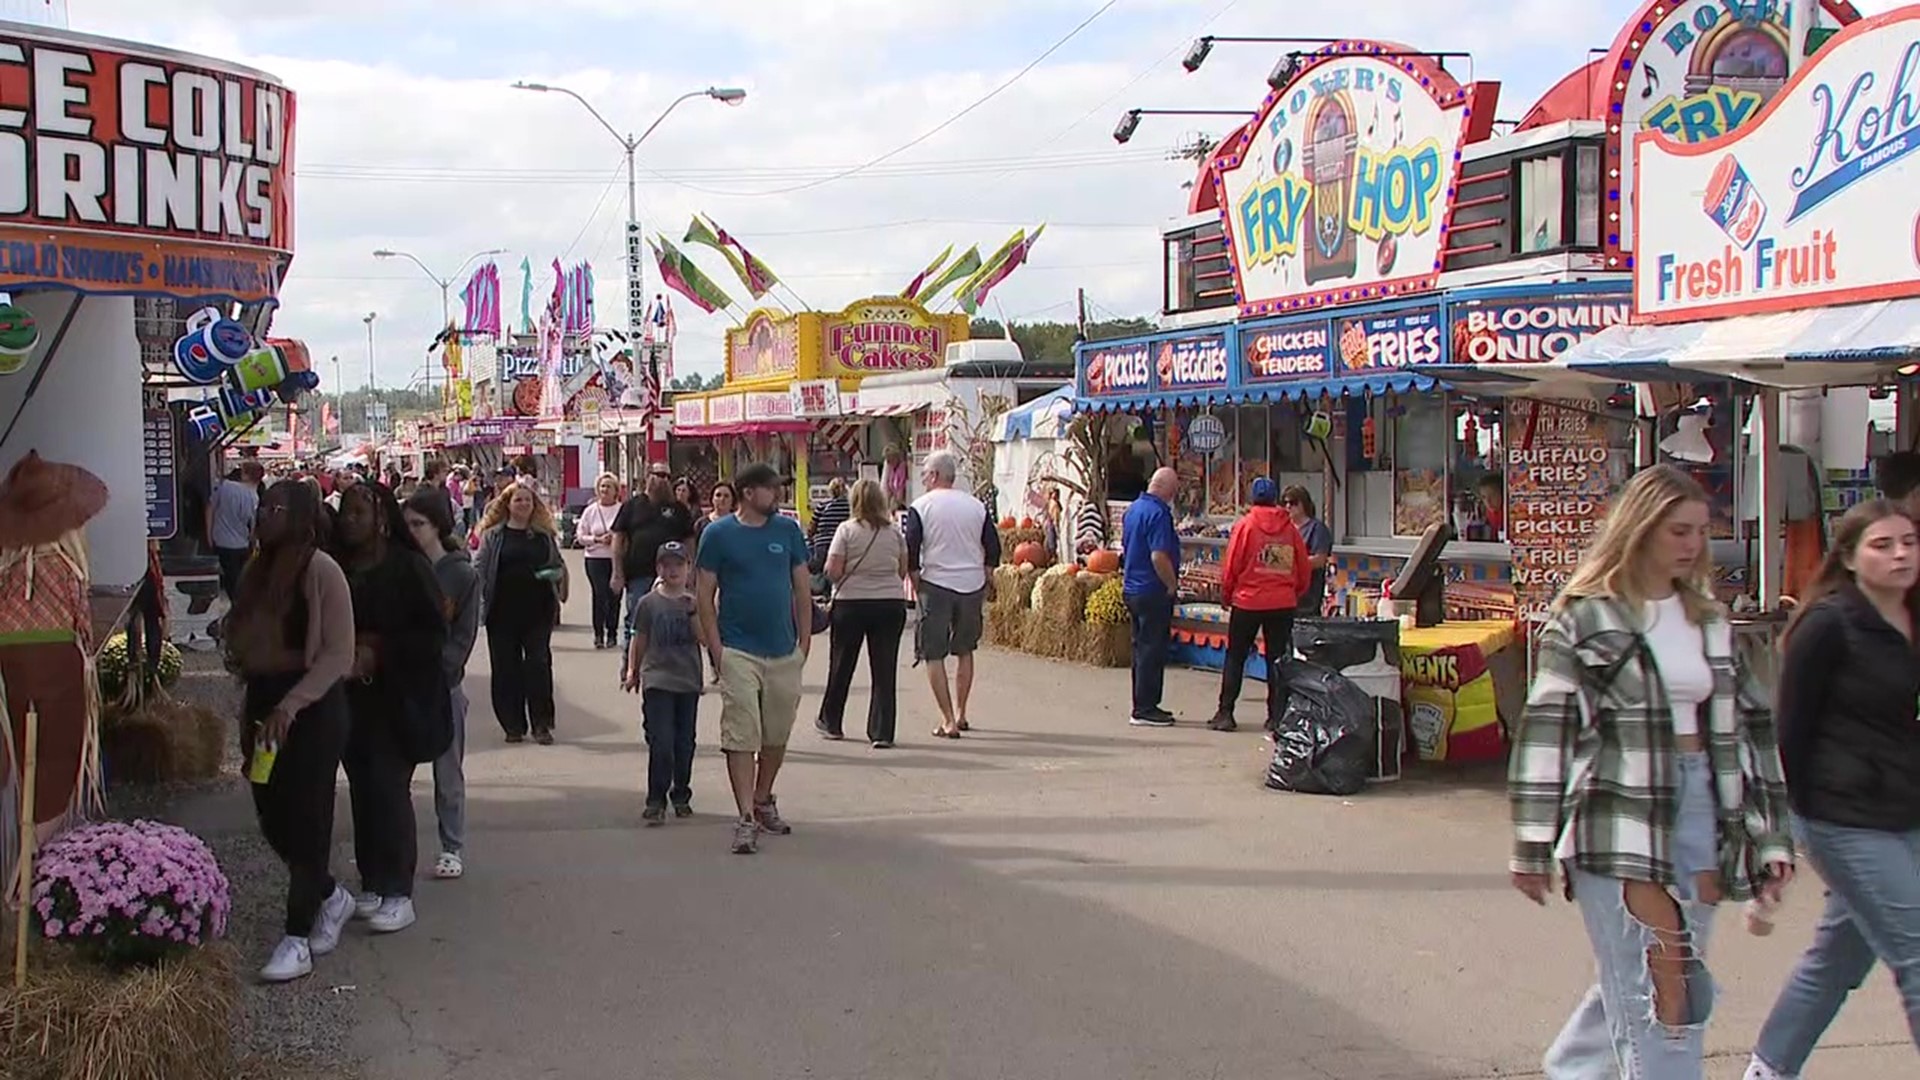 The Bloomsburg Fair only comes around once a year, and for some it’s a time to splurge. But how much is too much?